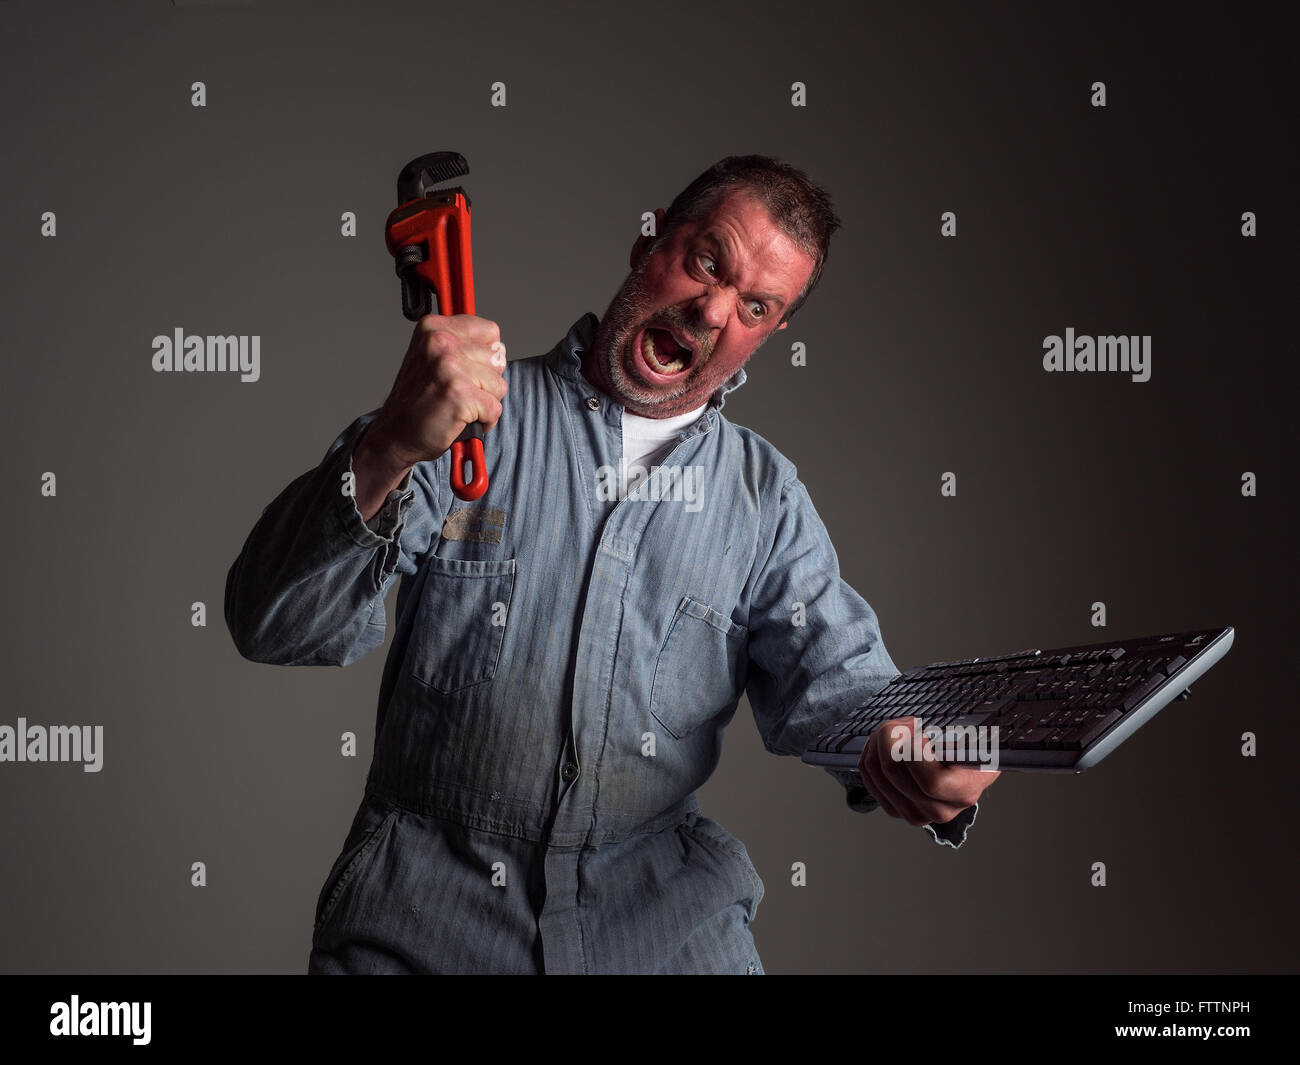 Photograph of an angry repairman hollering and about to smash a computer keyboard with an orange pipe wrench (humor). Stock Photo